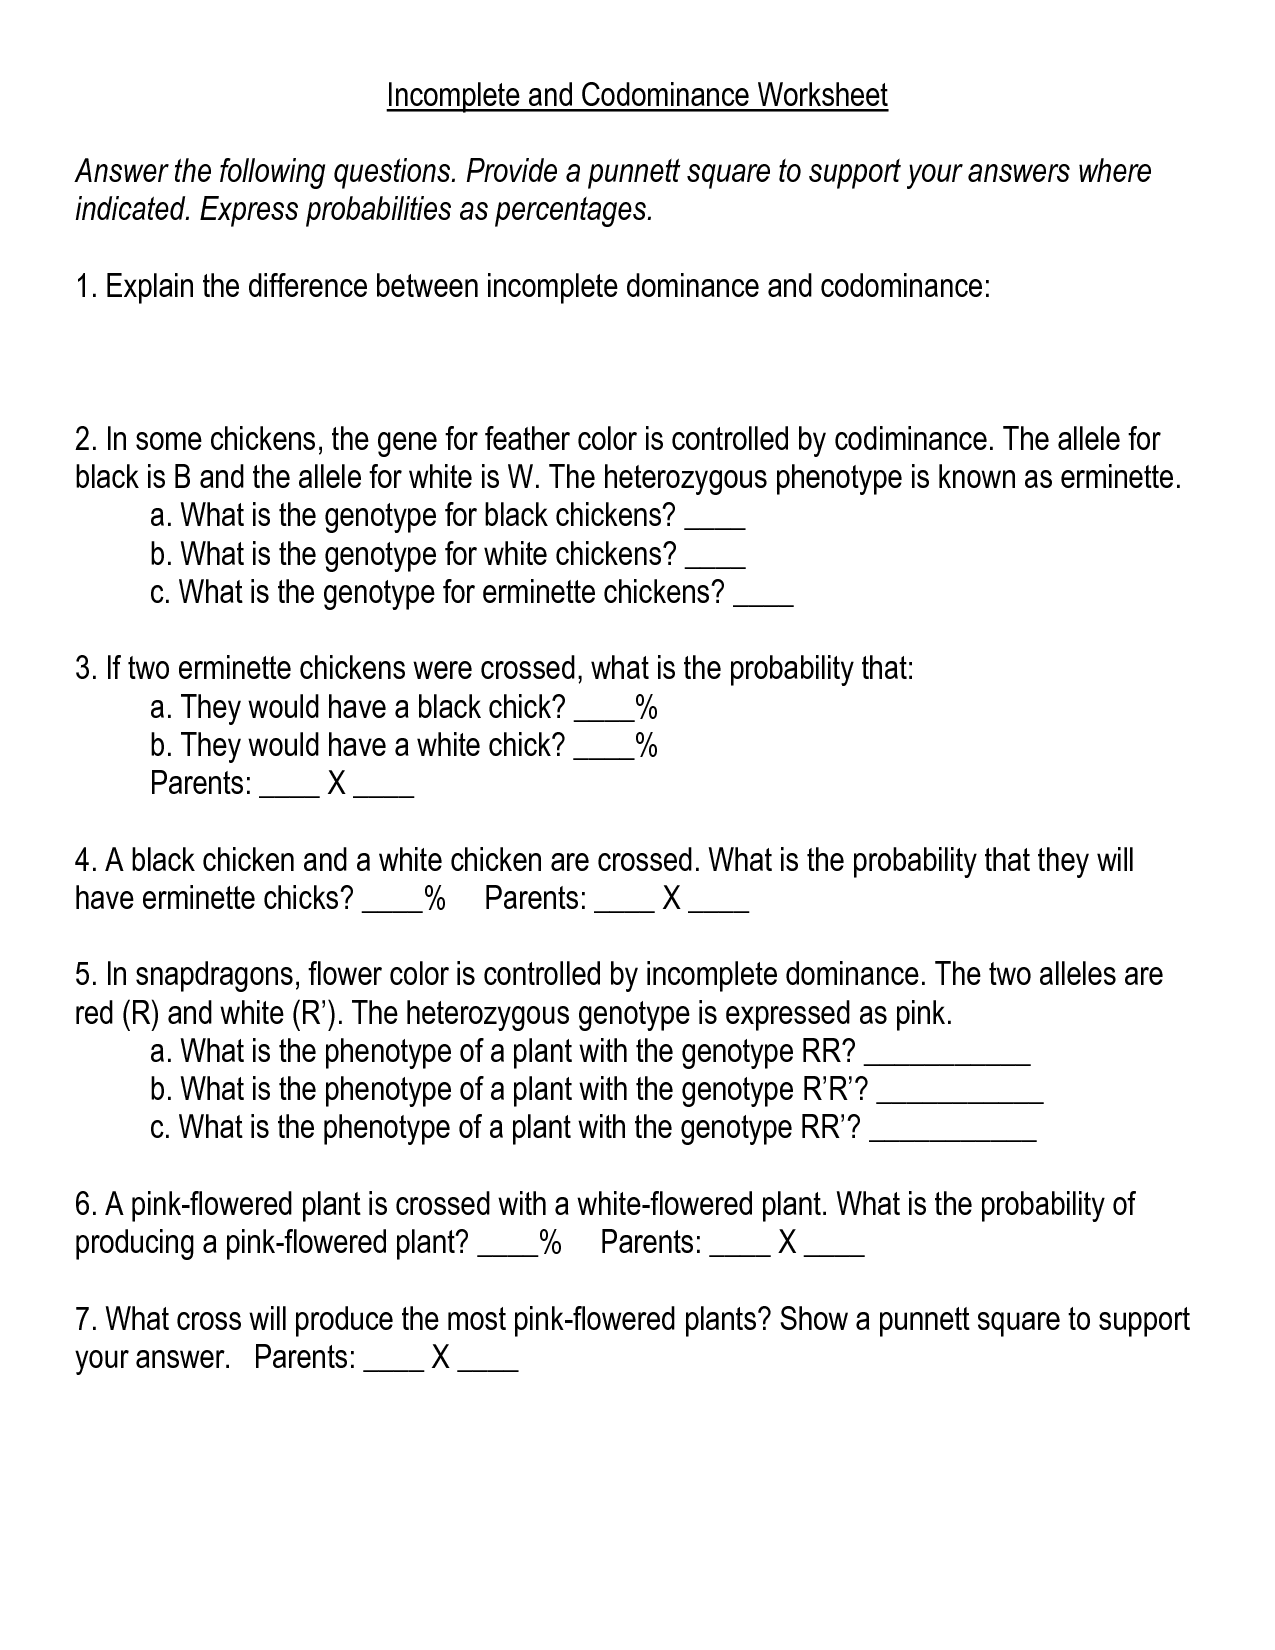 Complex Inheritance Incomplete Dominance And Codominance Worksheet Answers